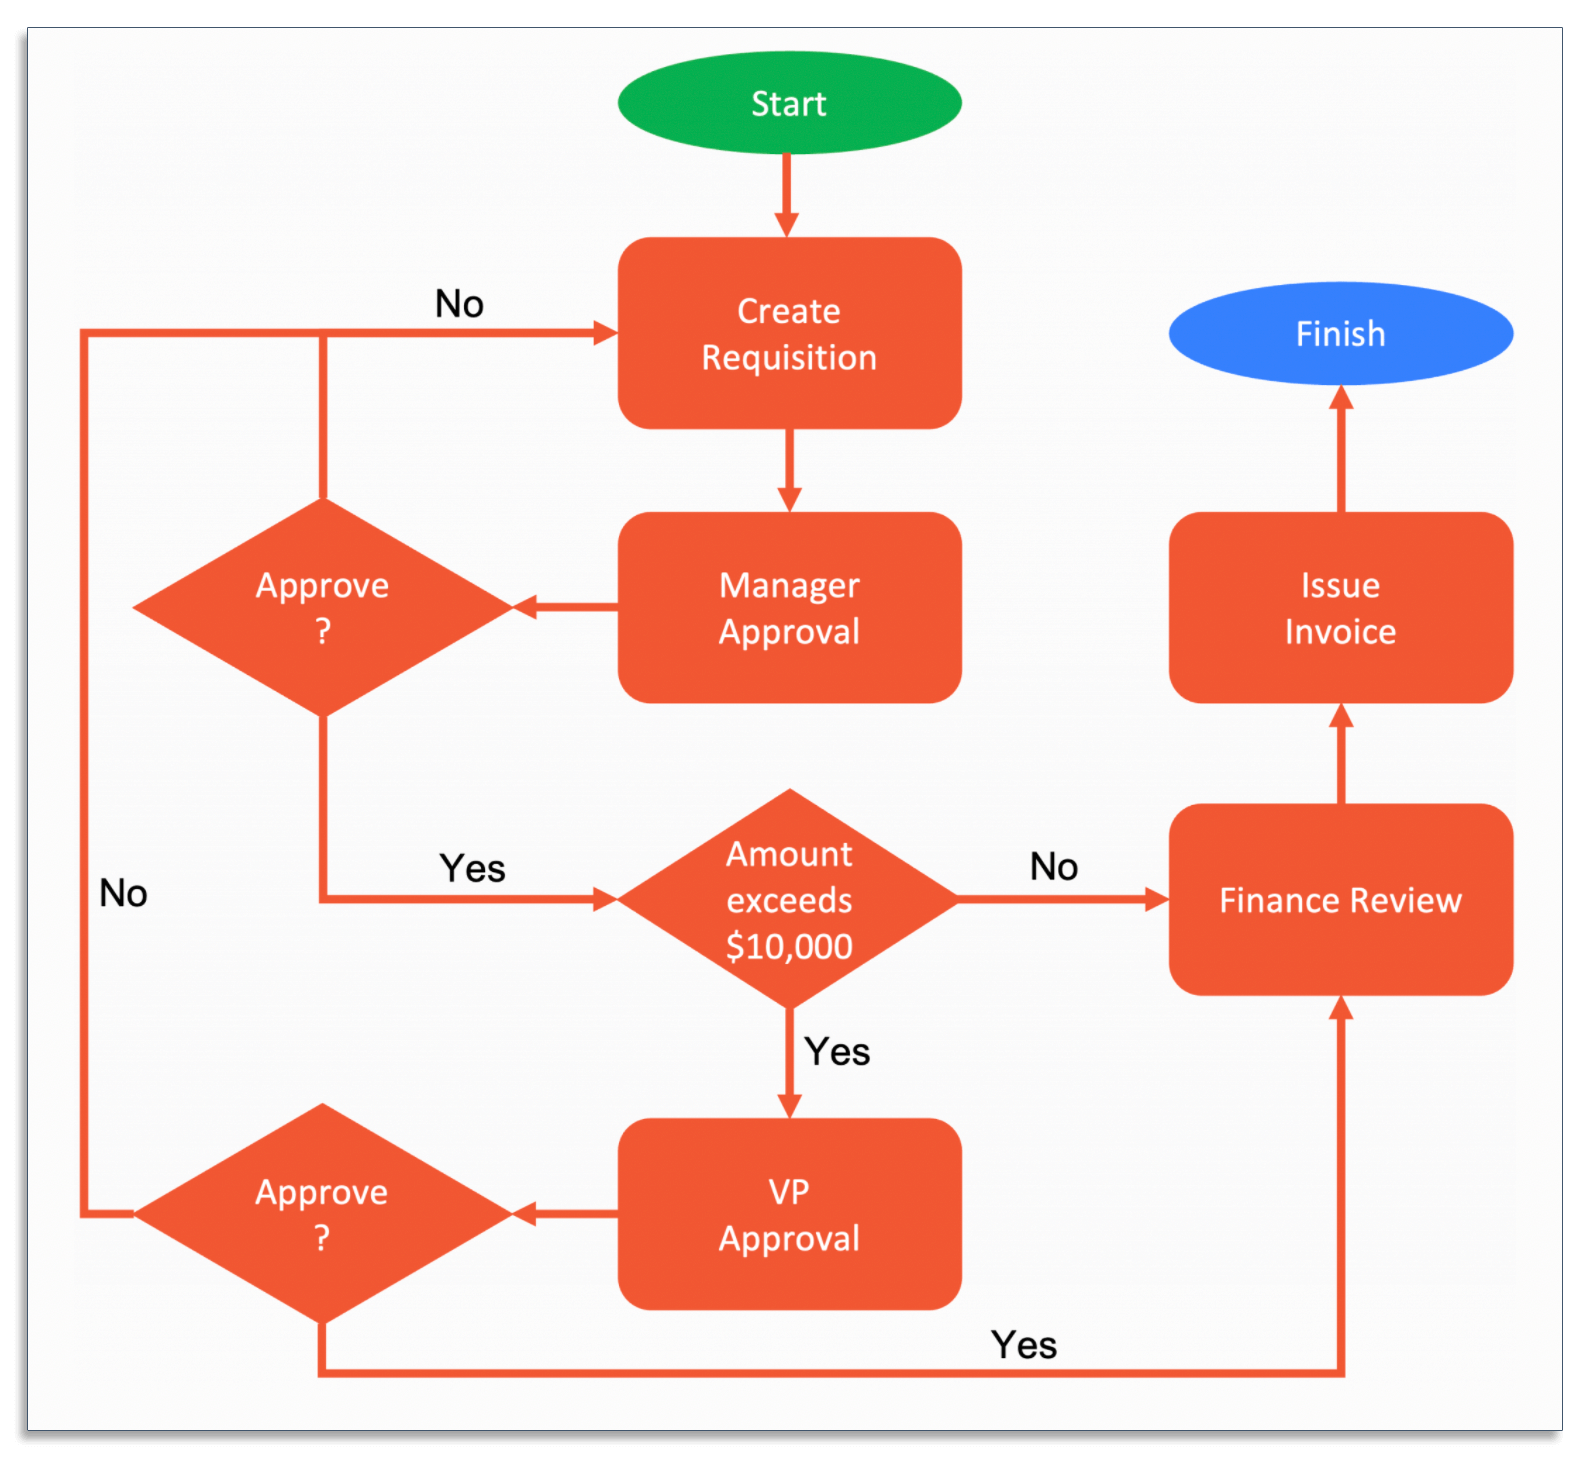 Example of a purchase order business process diagram